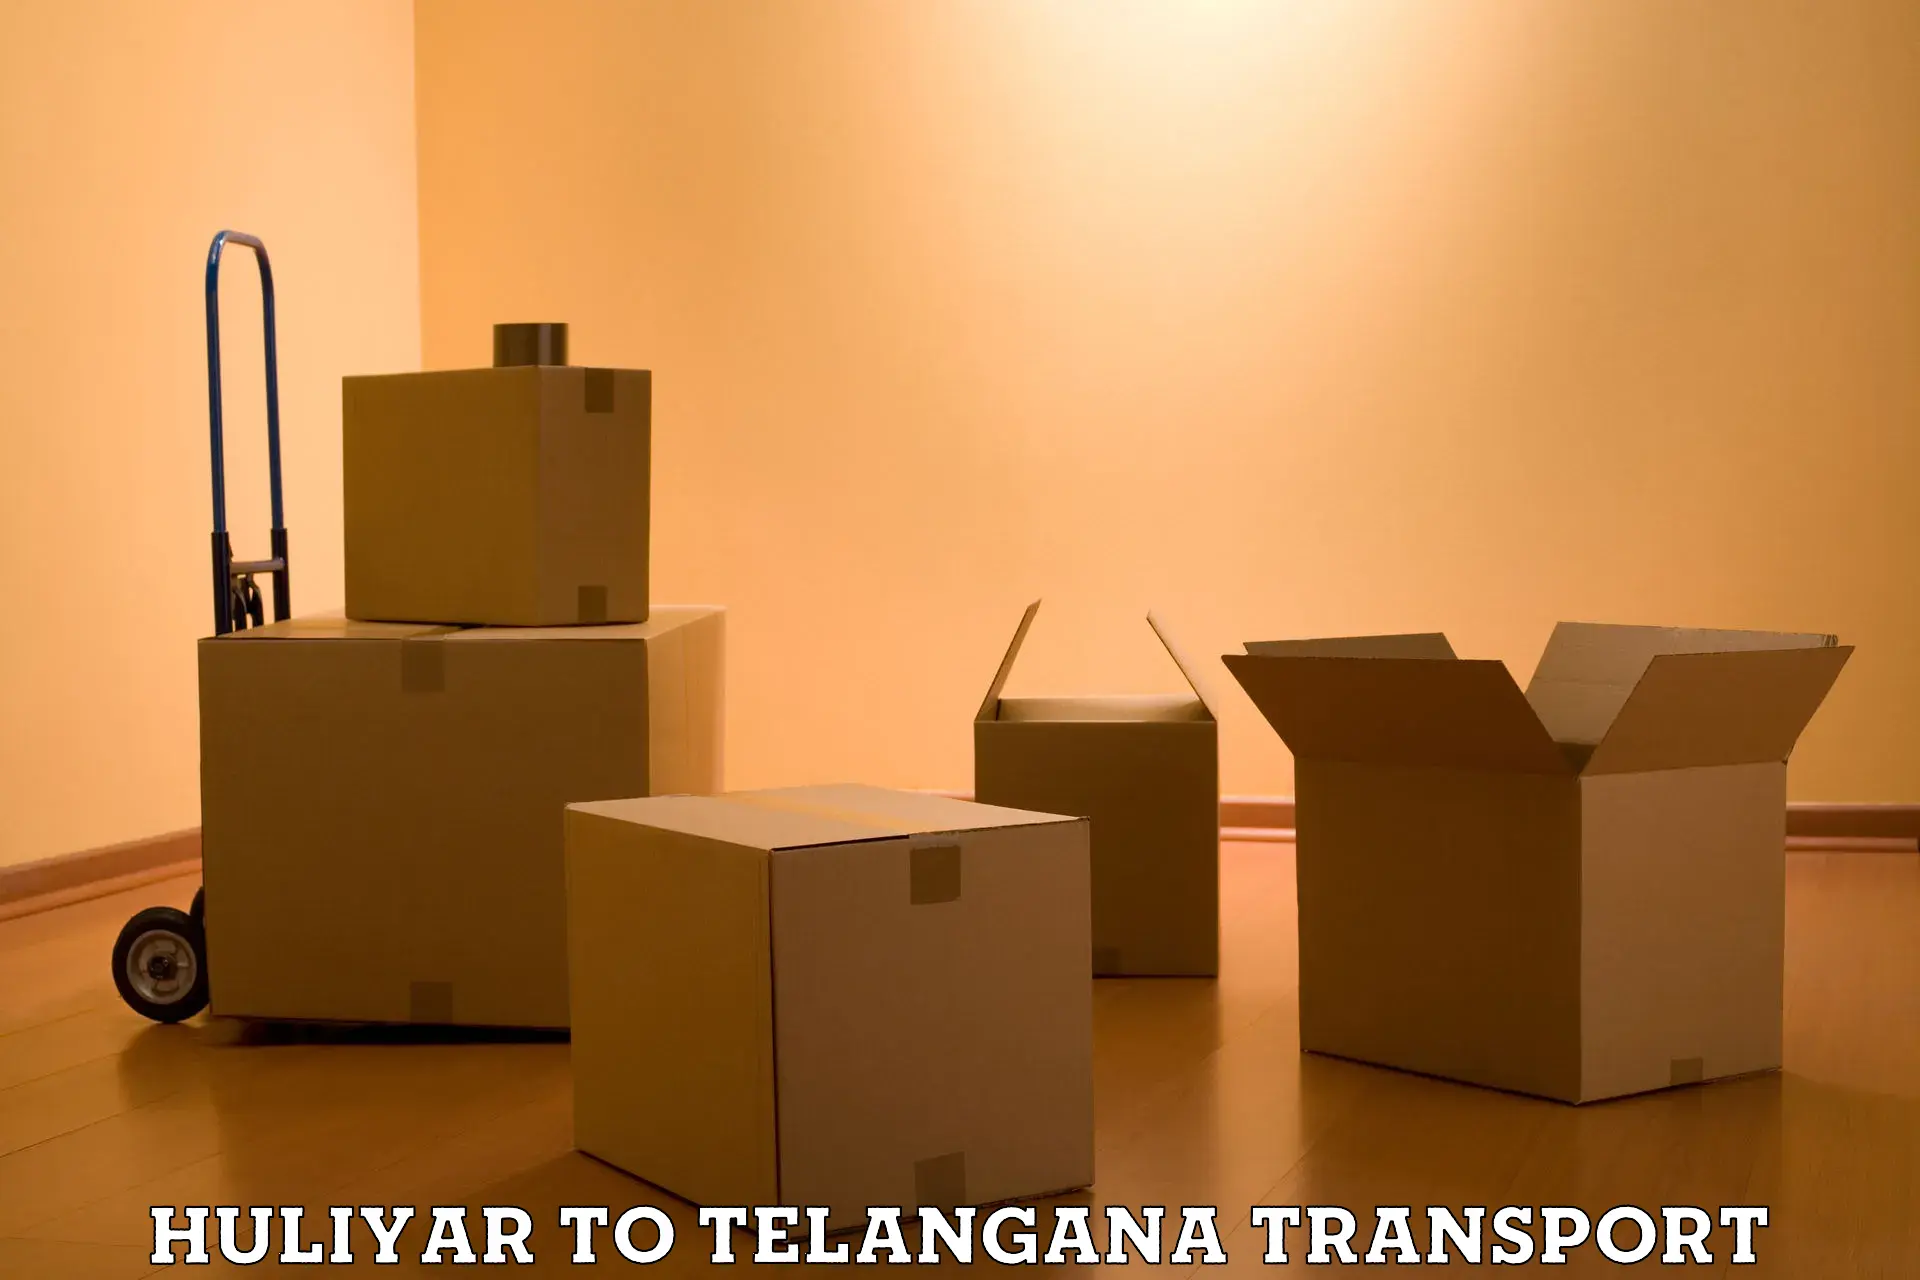 Container transport service in Huliyar to Siddipet